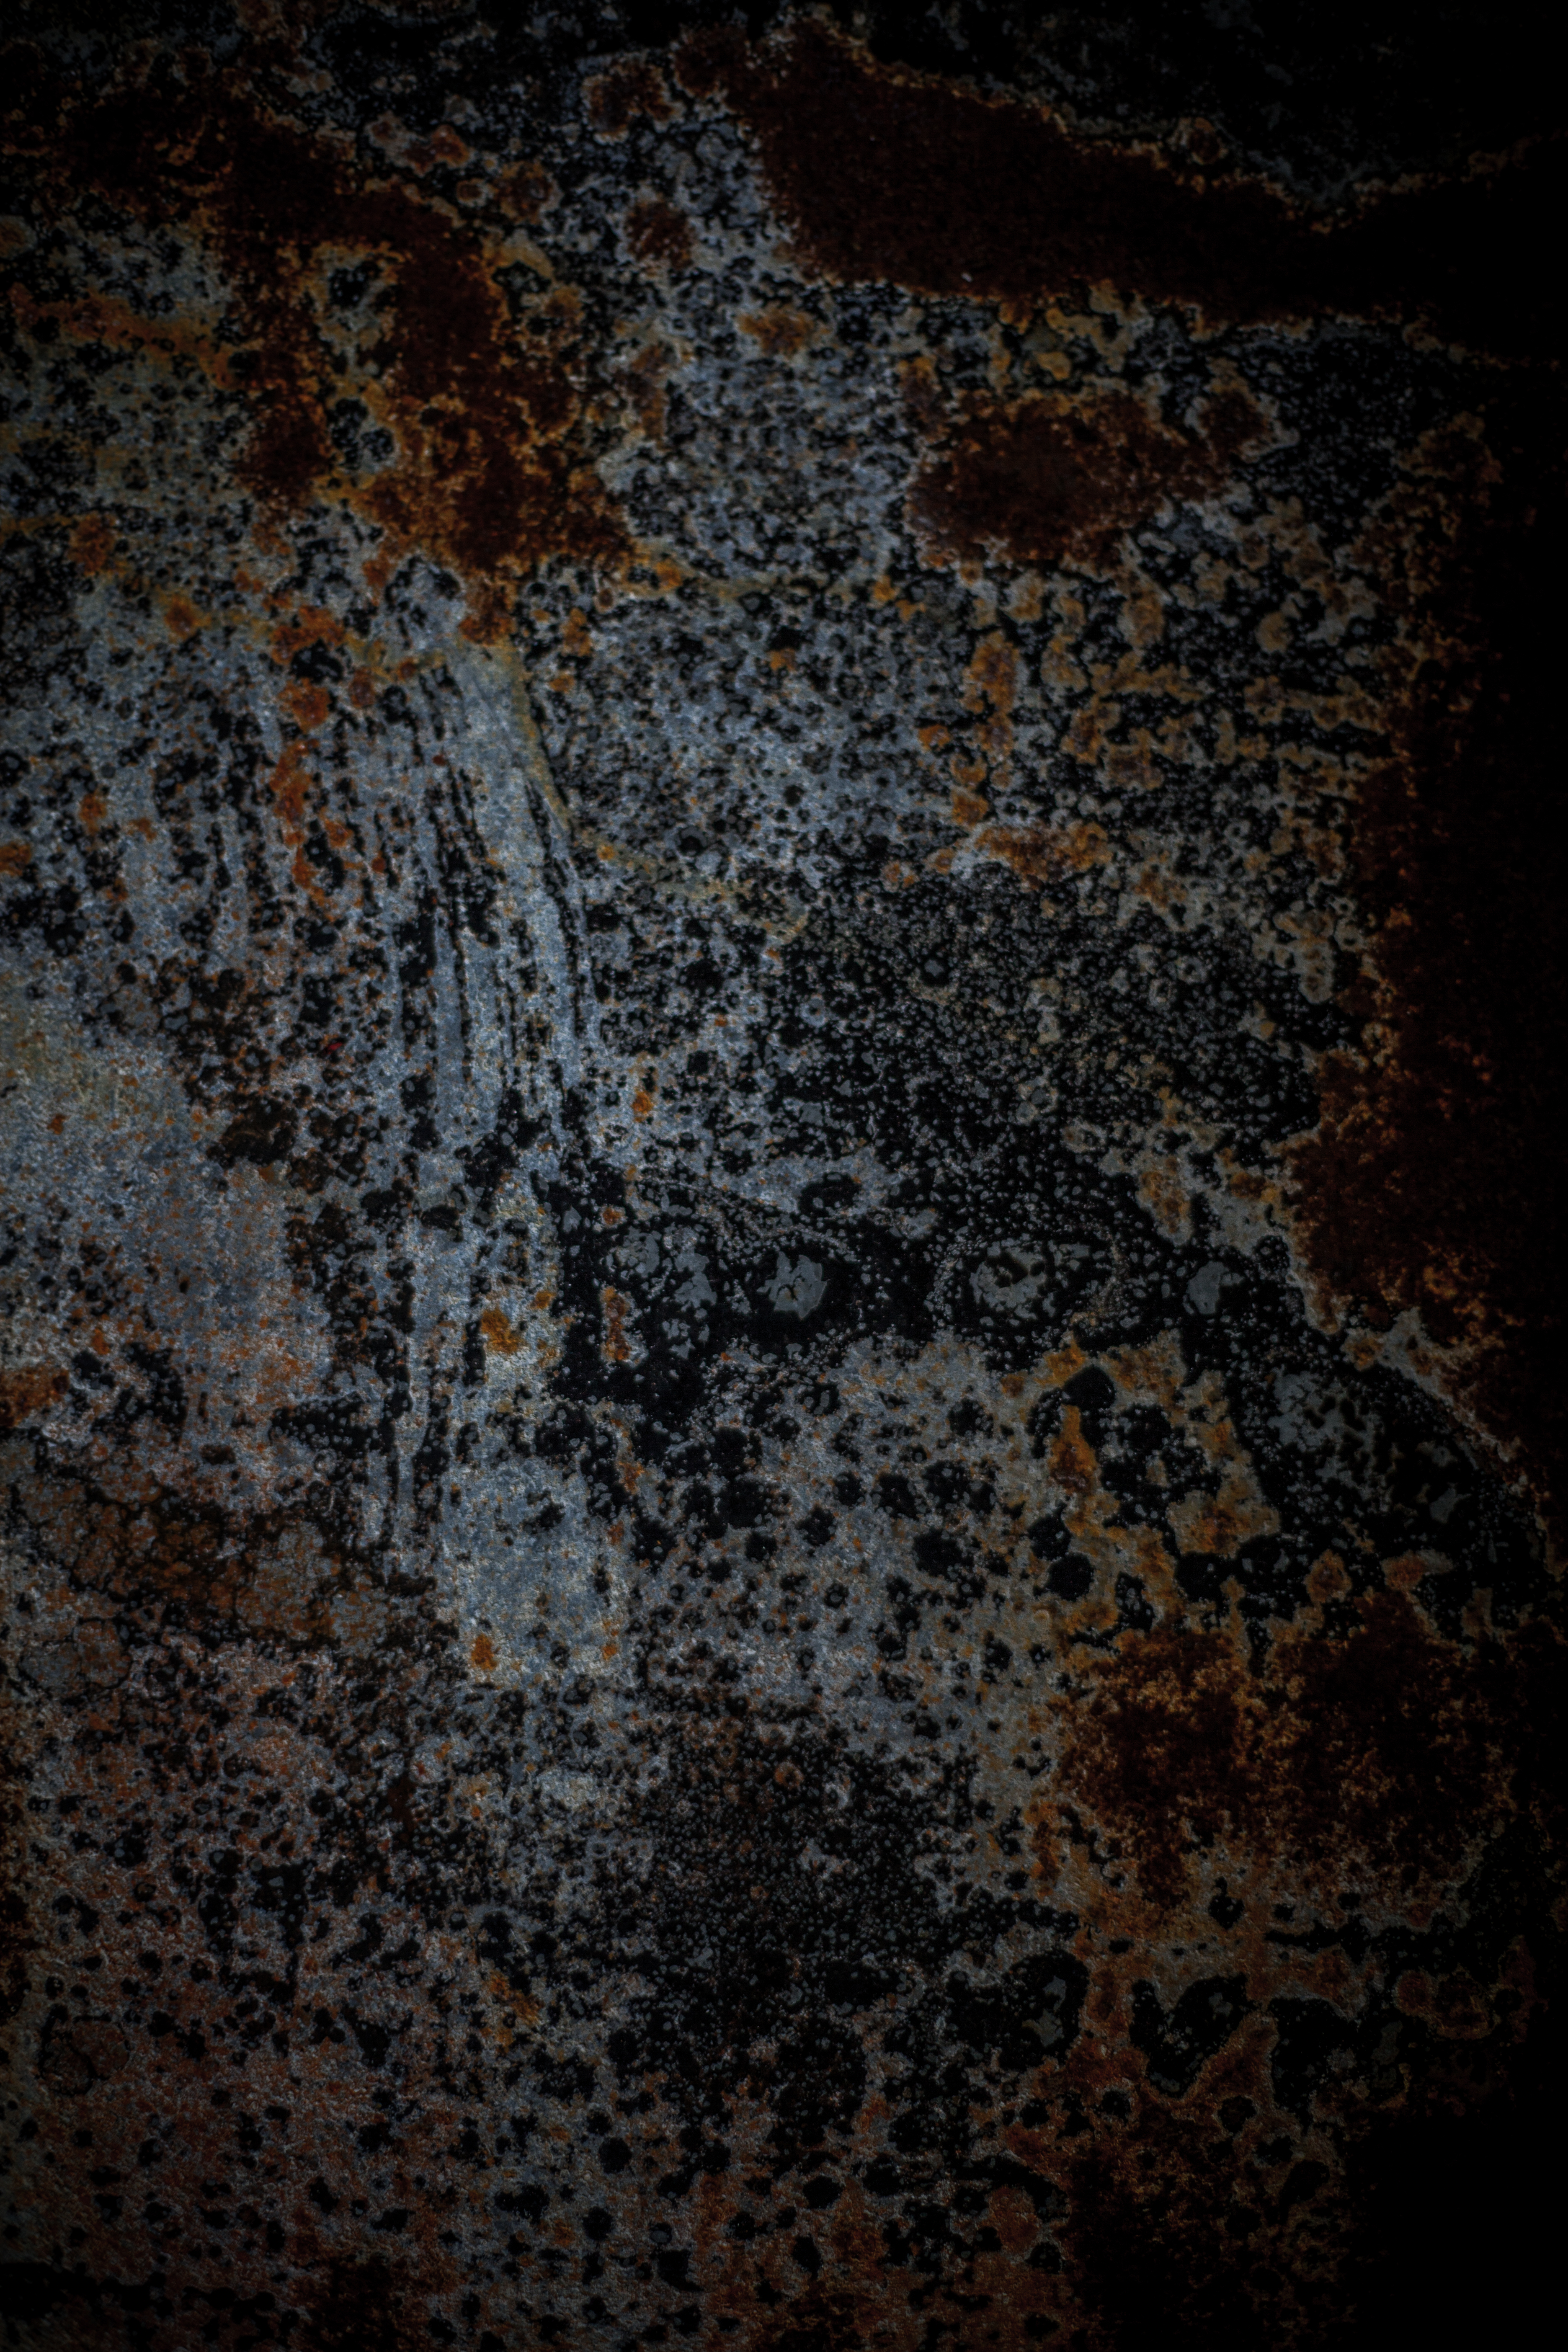 Gritty Rusted Surface